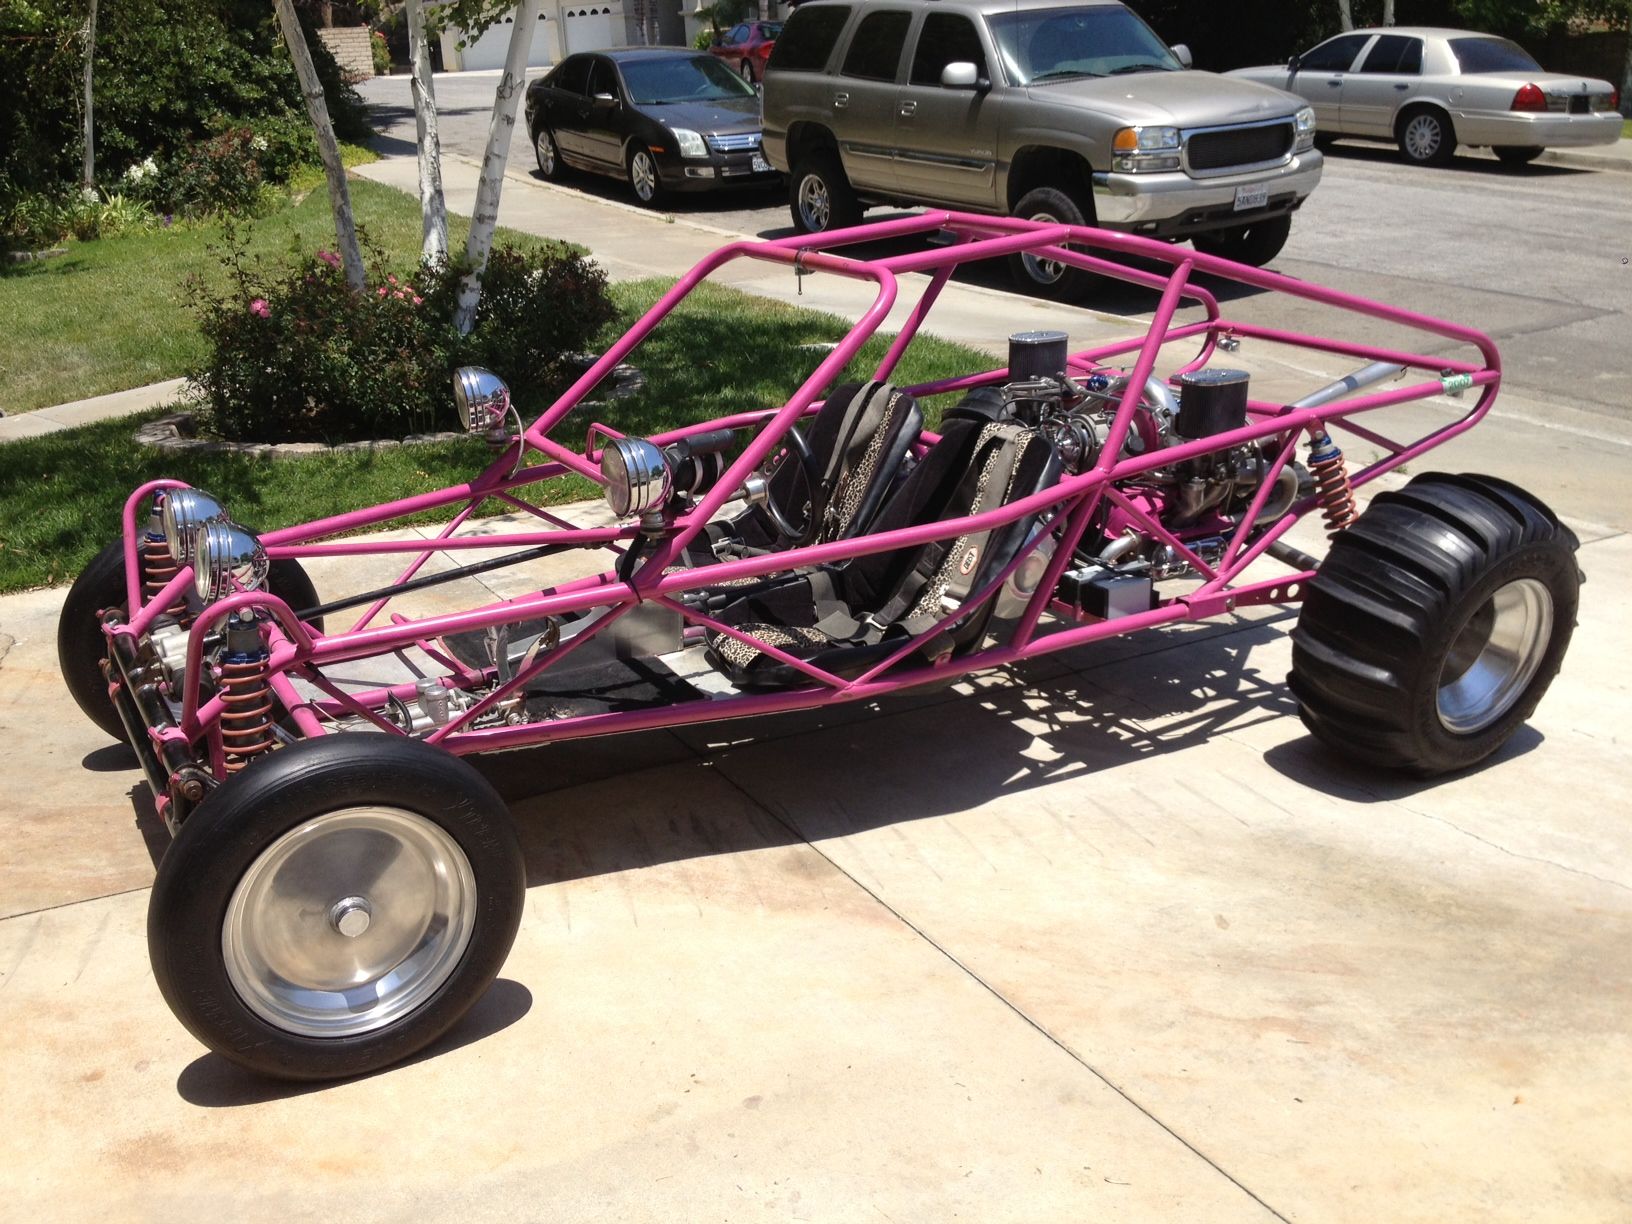 Sand Rail Cars for sale Dune Buggy Engine Systems Schematics VW Sand Ra...